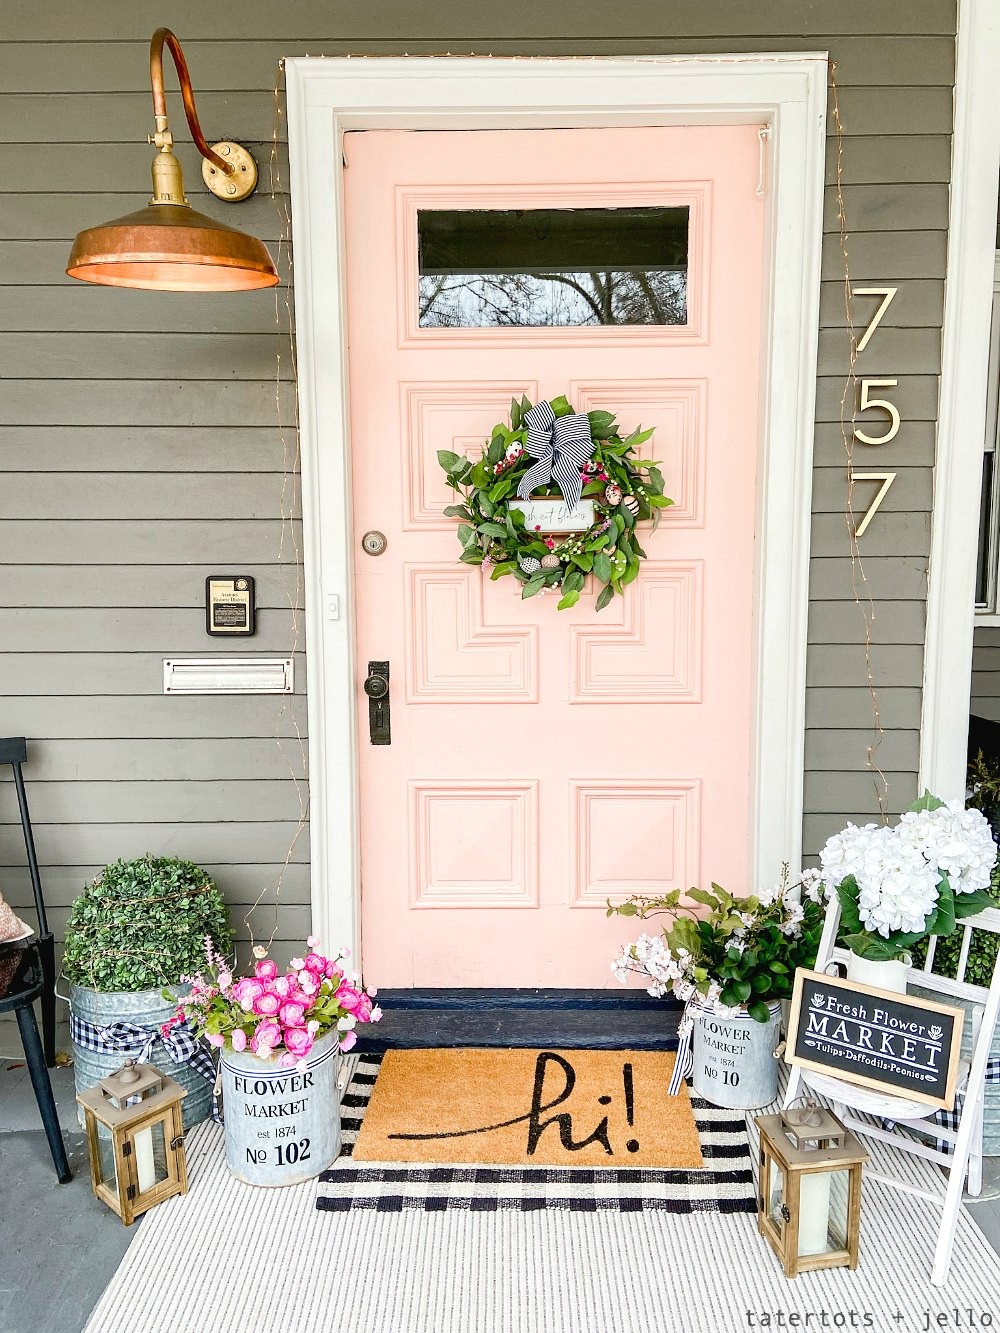 A peachy pink front door and potted plants on porch